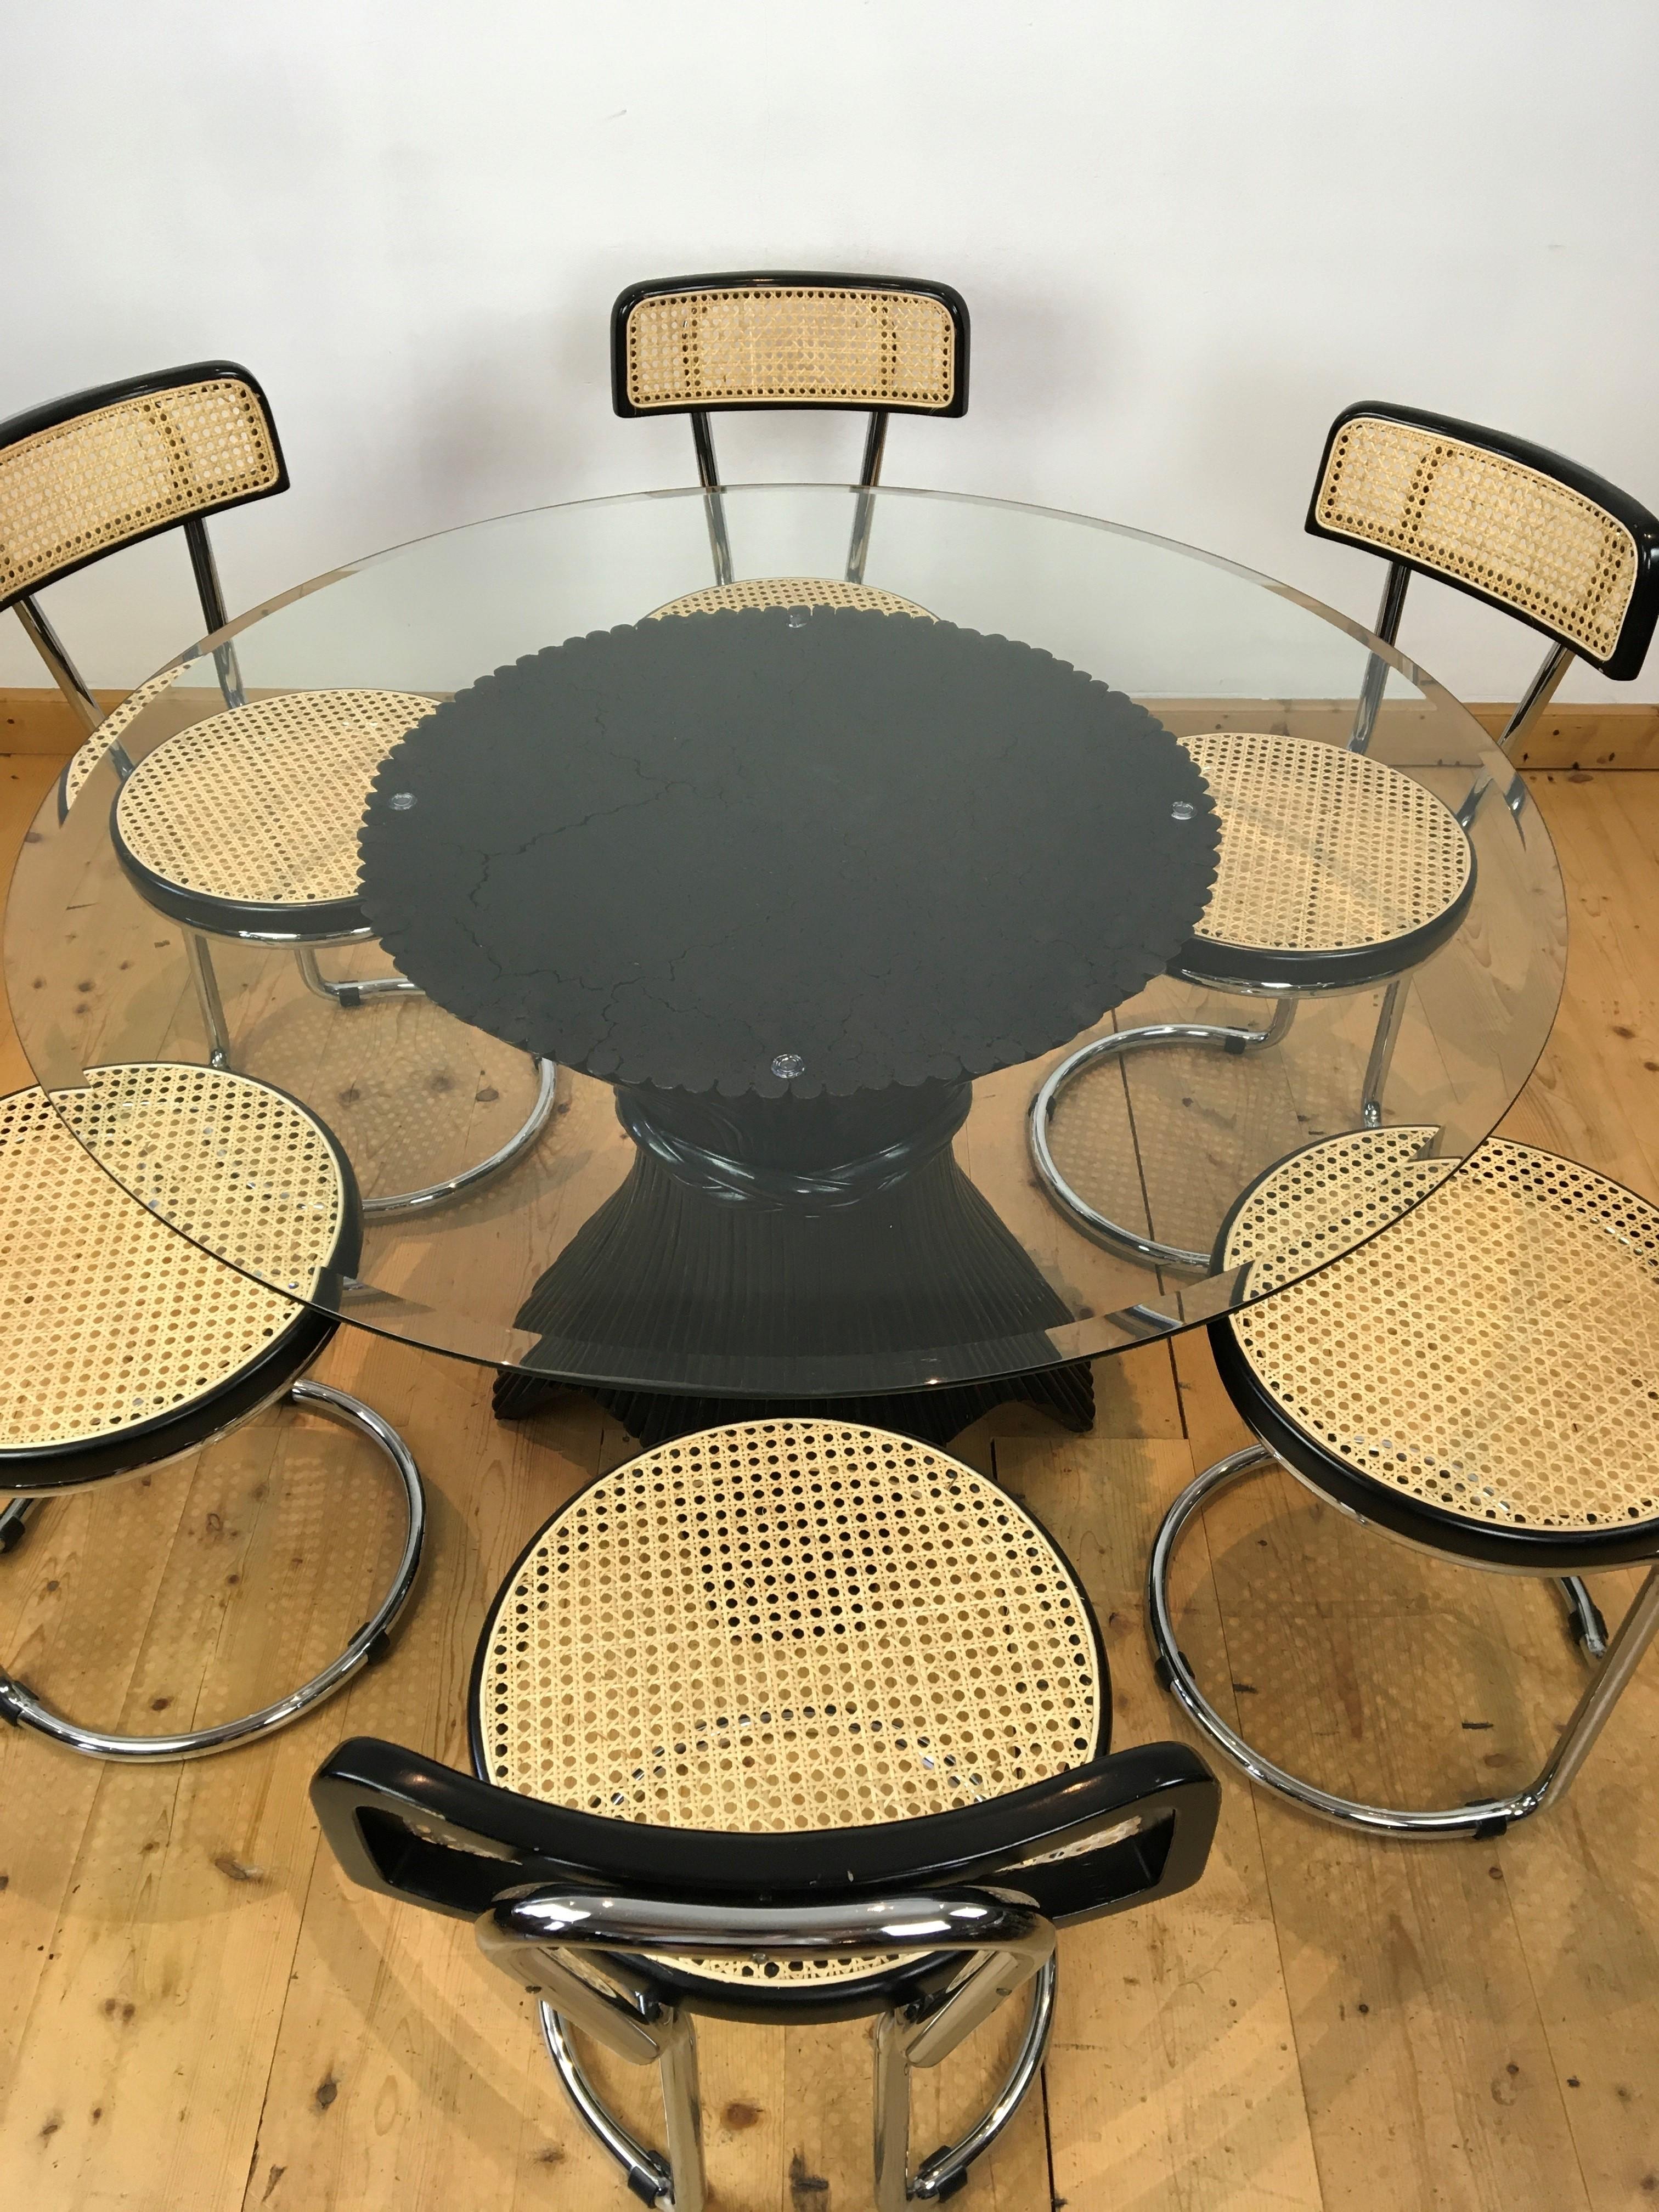 Black lacquered rattan dining room table base.
A ding room table for 6 which looks like a large sheaf of wheat in the style of McGuire. Hand-crafted bent and cut twisted bamboo table which is stylish by the black lacquered color and the shape. A